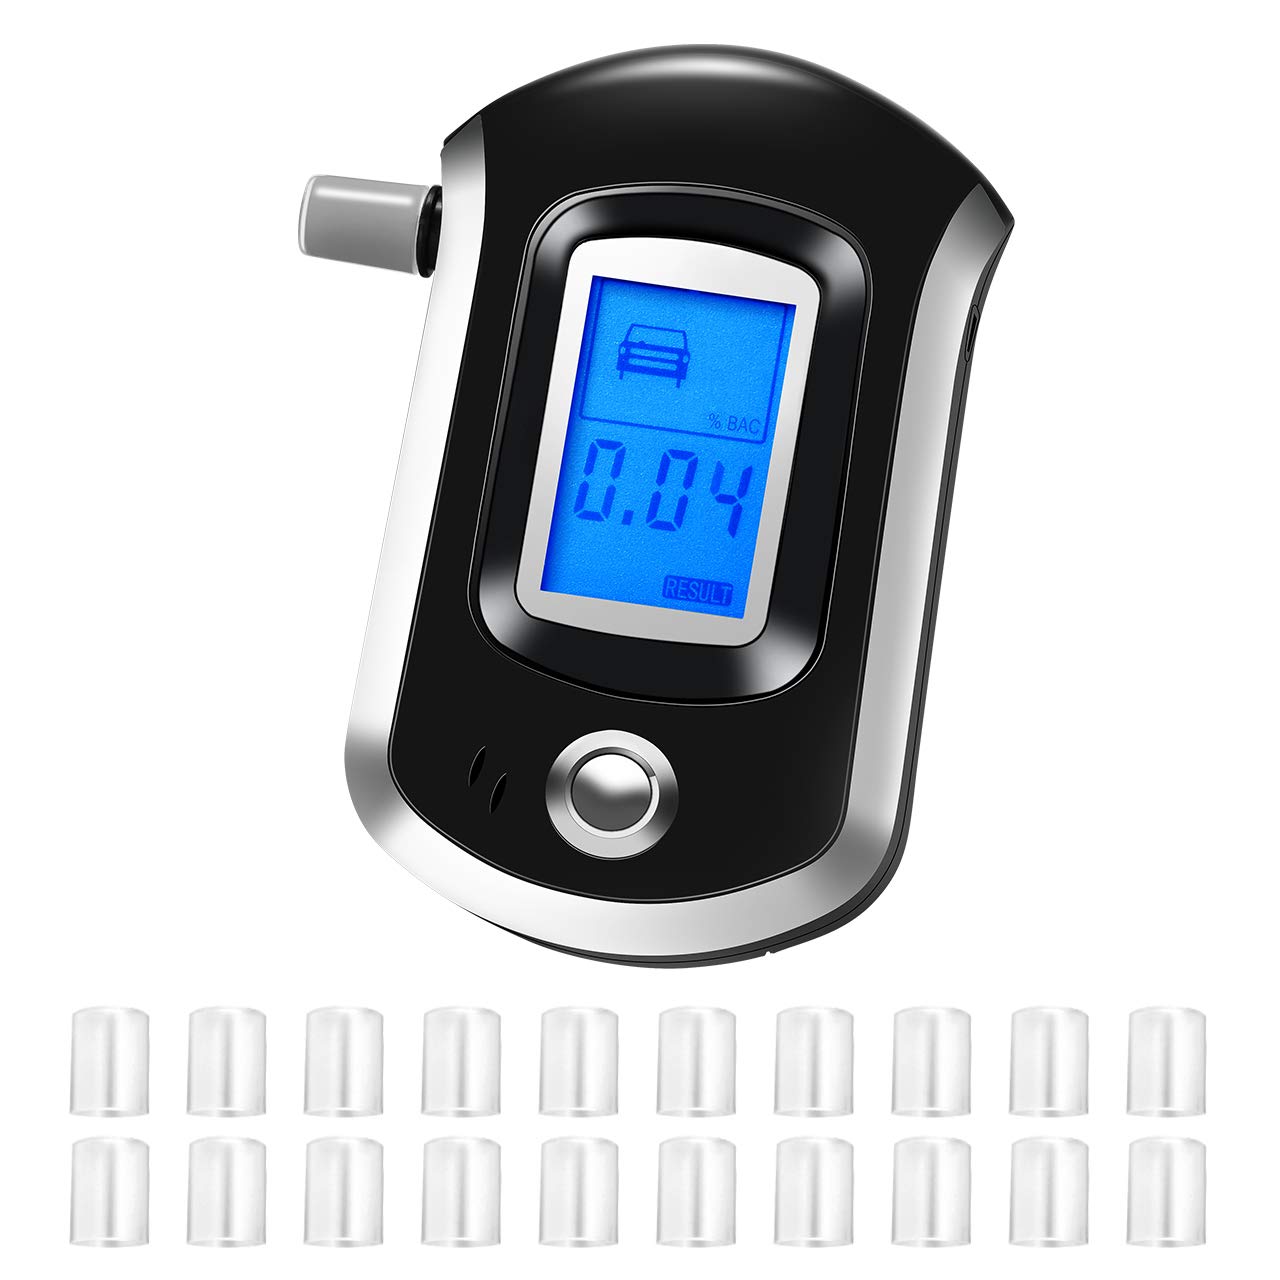 Breathalyzer Alcohol Tester Professional Breathalyzer Digital LCD Breath Tester Semi-Conductor Sensor with 4 Mouthpieces Portable Breath Alcohol Tester for Detecting Alcohol Concentration.